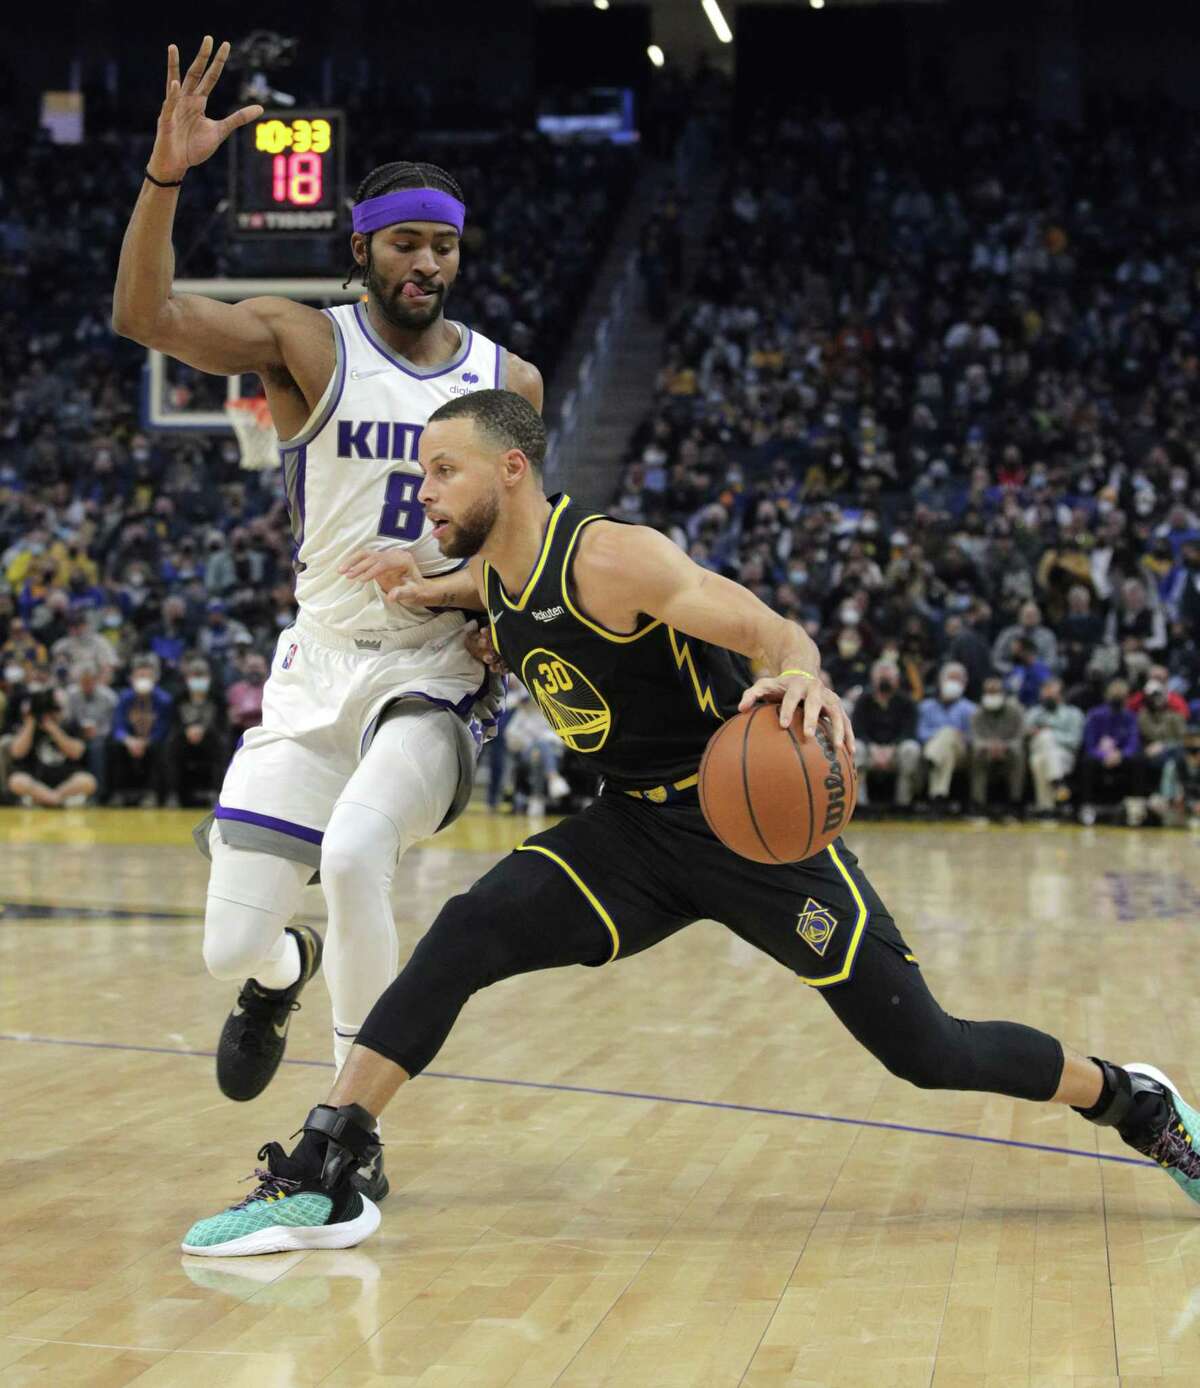 Stephen Curry (30) puts the brakes on while defended by Maurice Harkless (8) in the first half as the Golden State Warriors played the Sacramento Kings at Chase Center in San Francisco, Calif., on Thursday, February 3, 2022.